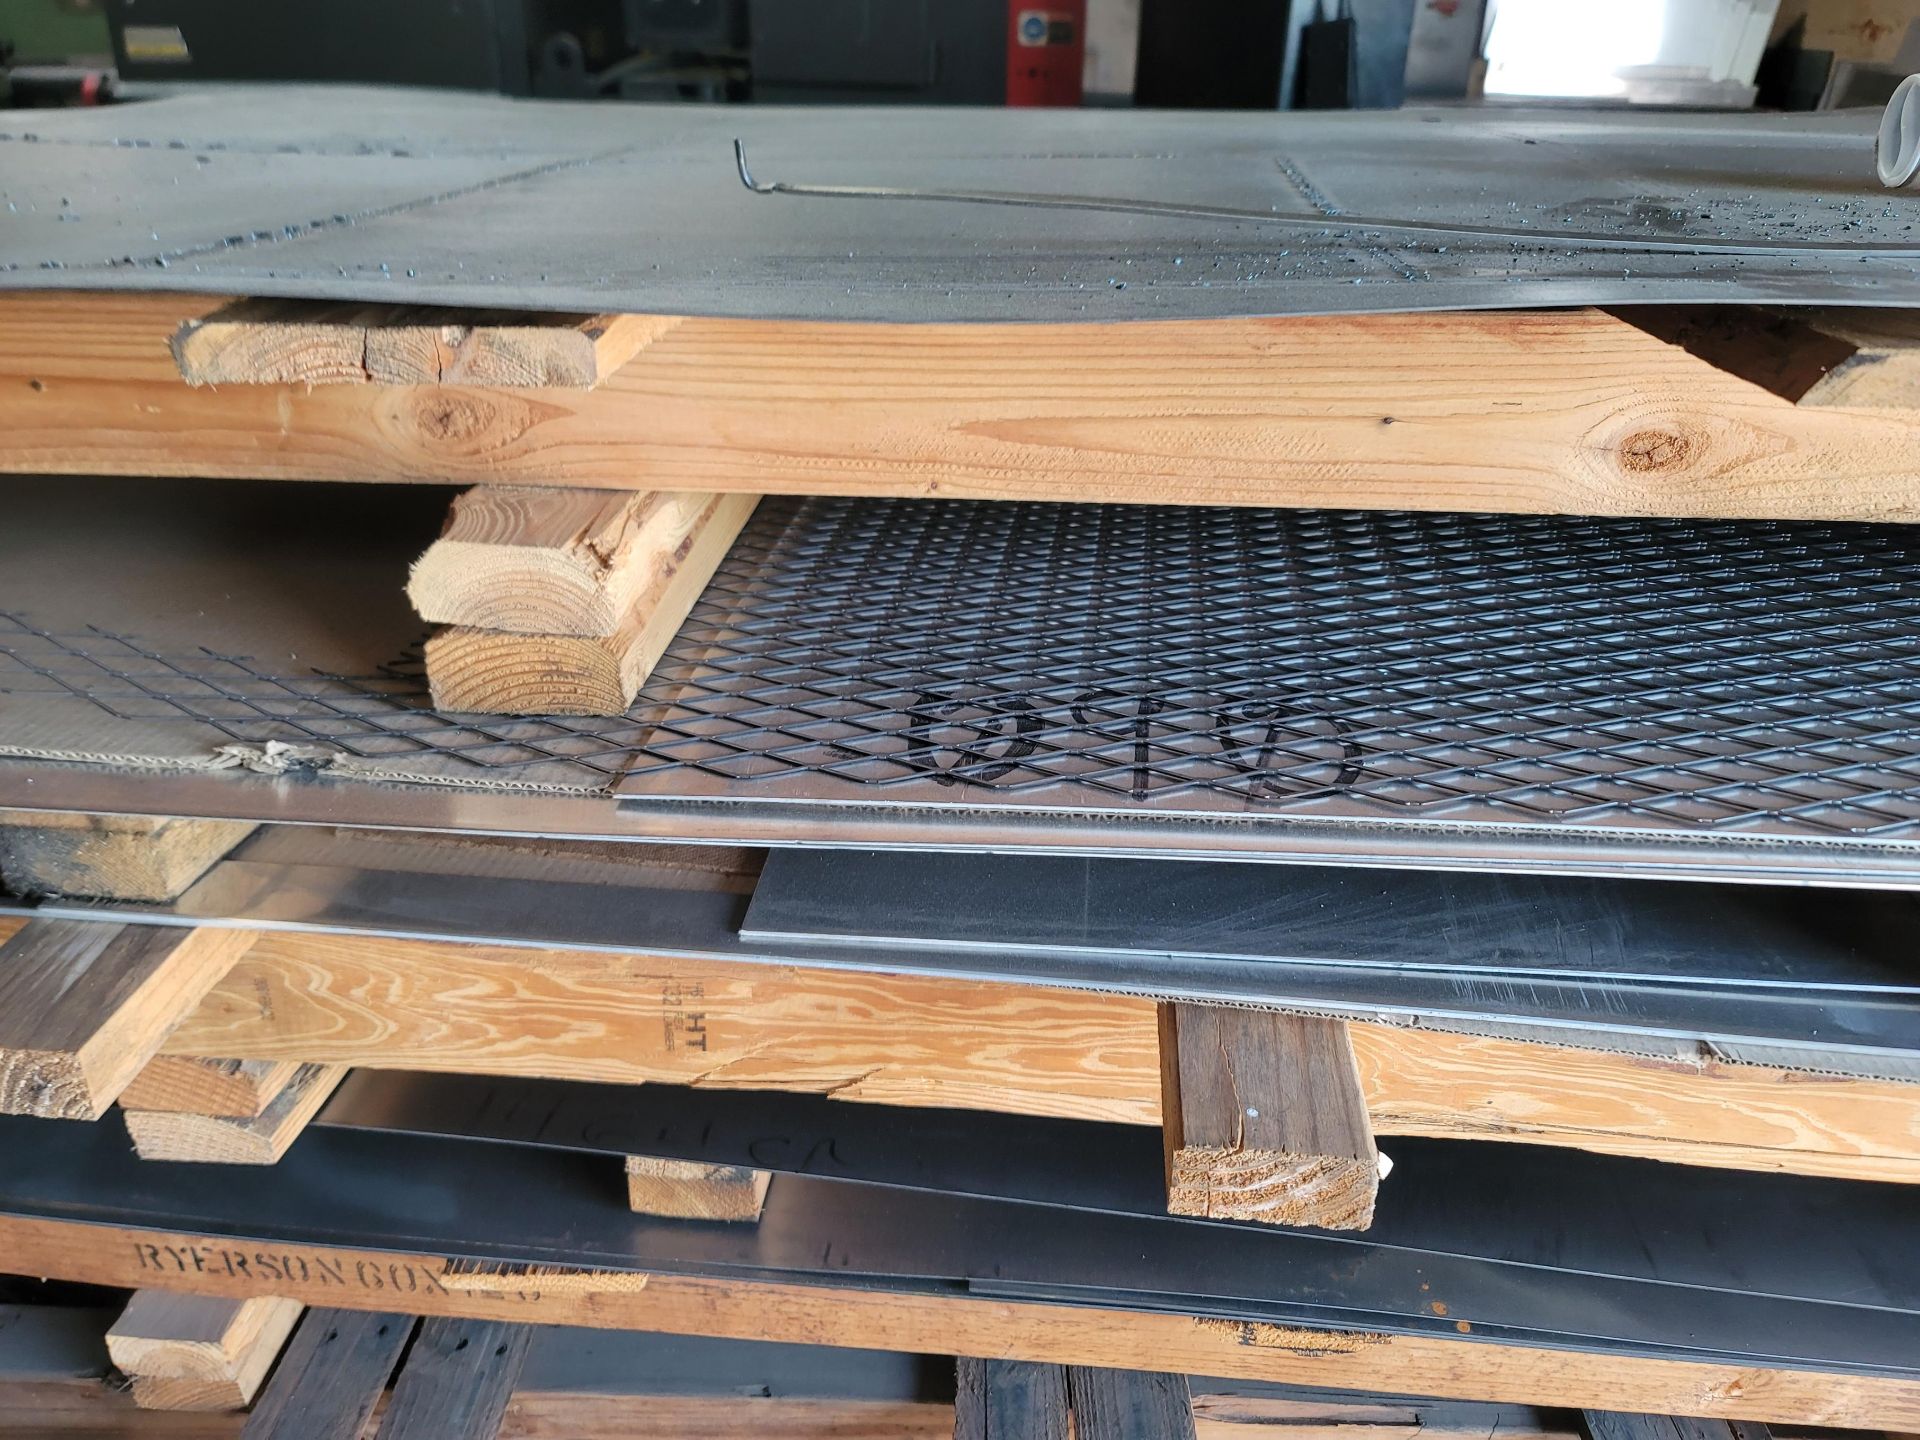 LOT - PALLETS OF SHEET MATERIAL: (5) PALLETS OF ASSORTED ALUMINUM, STEEL AND EXPANDED STEEL MESH - Image 2 of 3